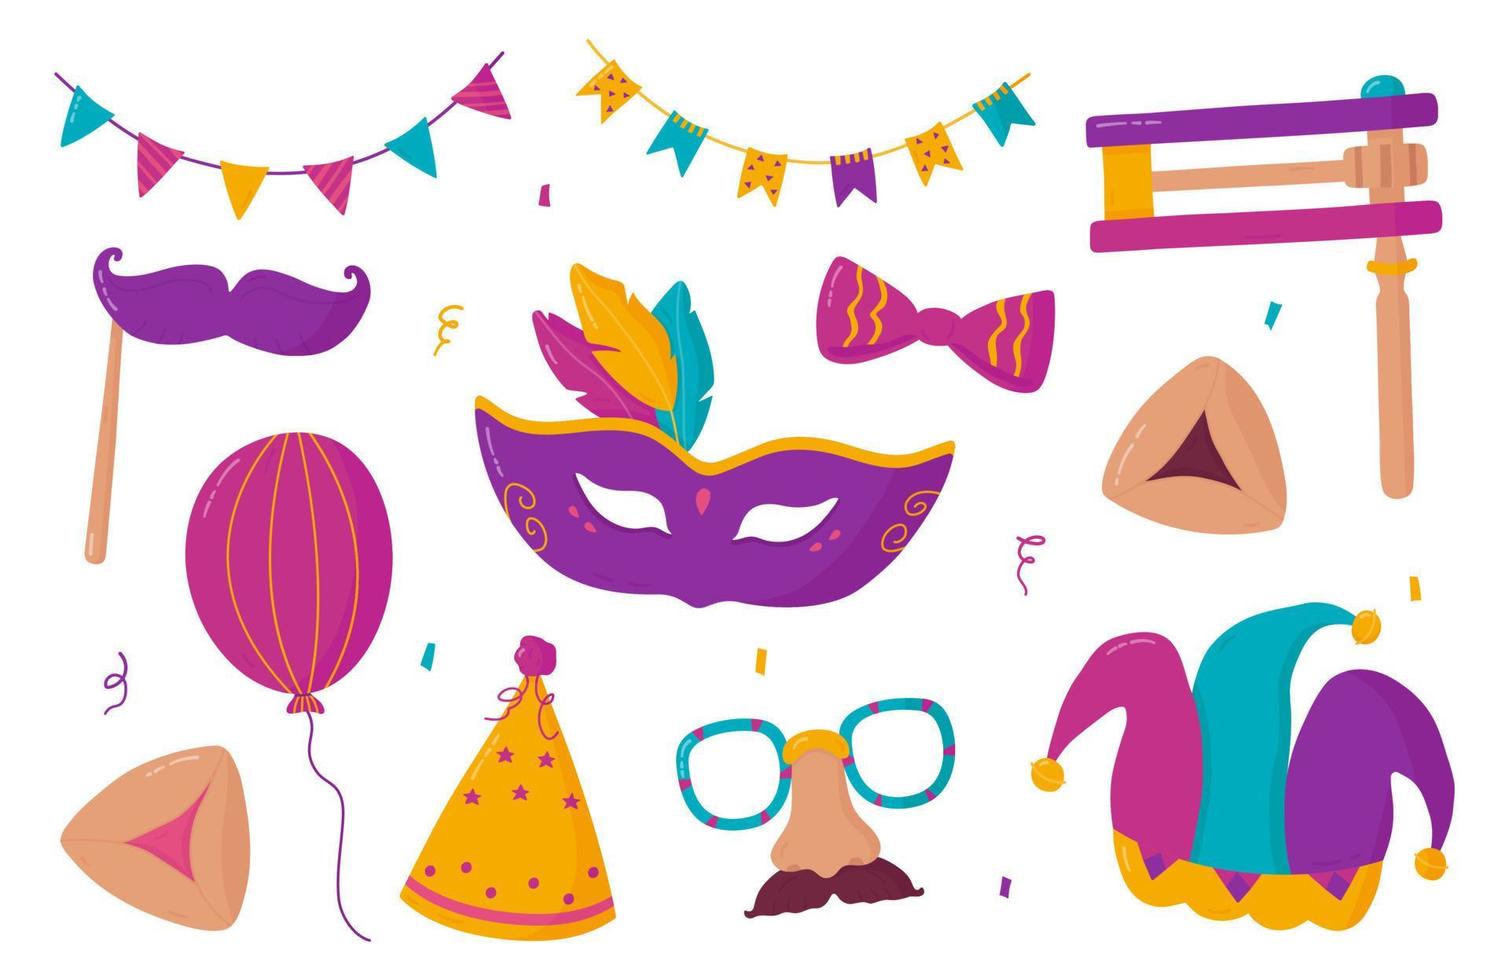 Purim elements set. Vector collection of holiday carnival masks, gragger, Hamantaschen cookies, jester hat, balloon, bow, confetti, party hat and garland isolated on white background